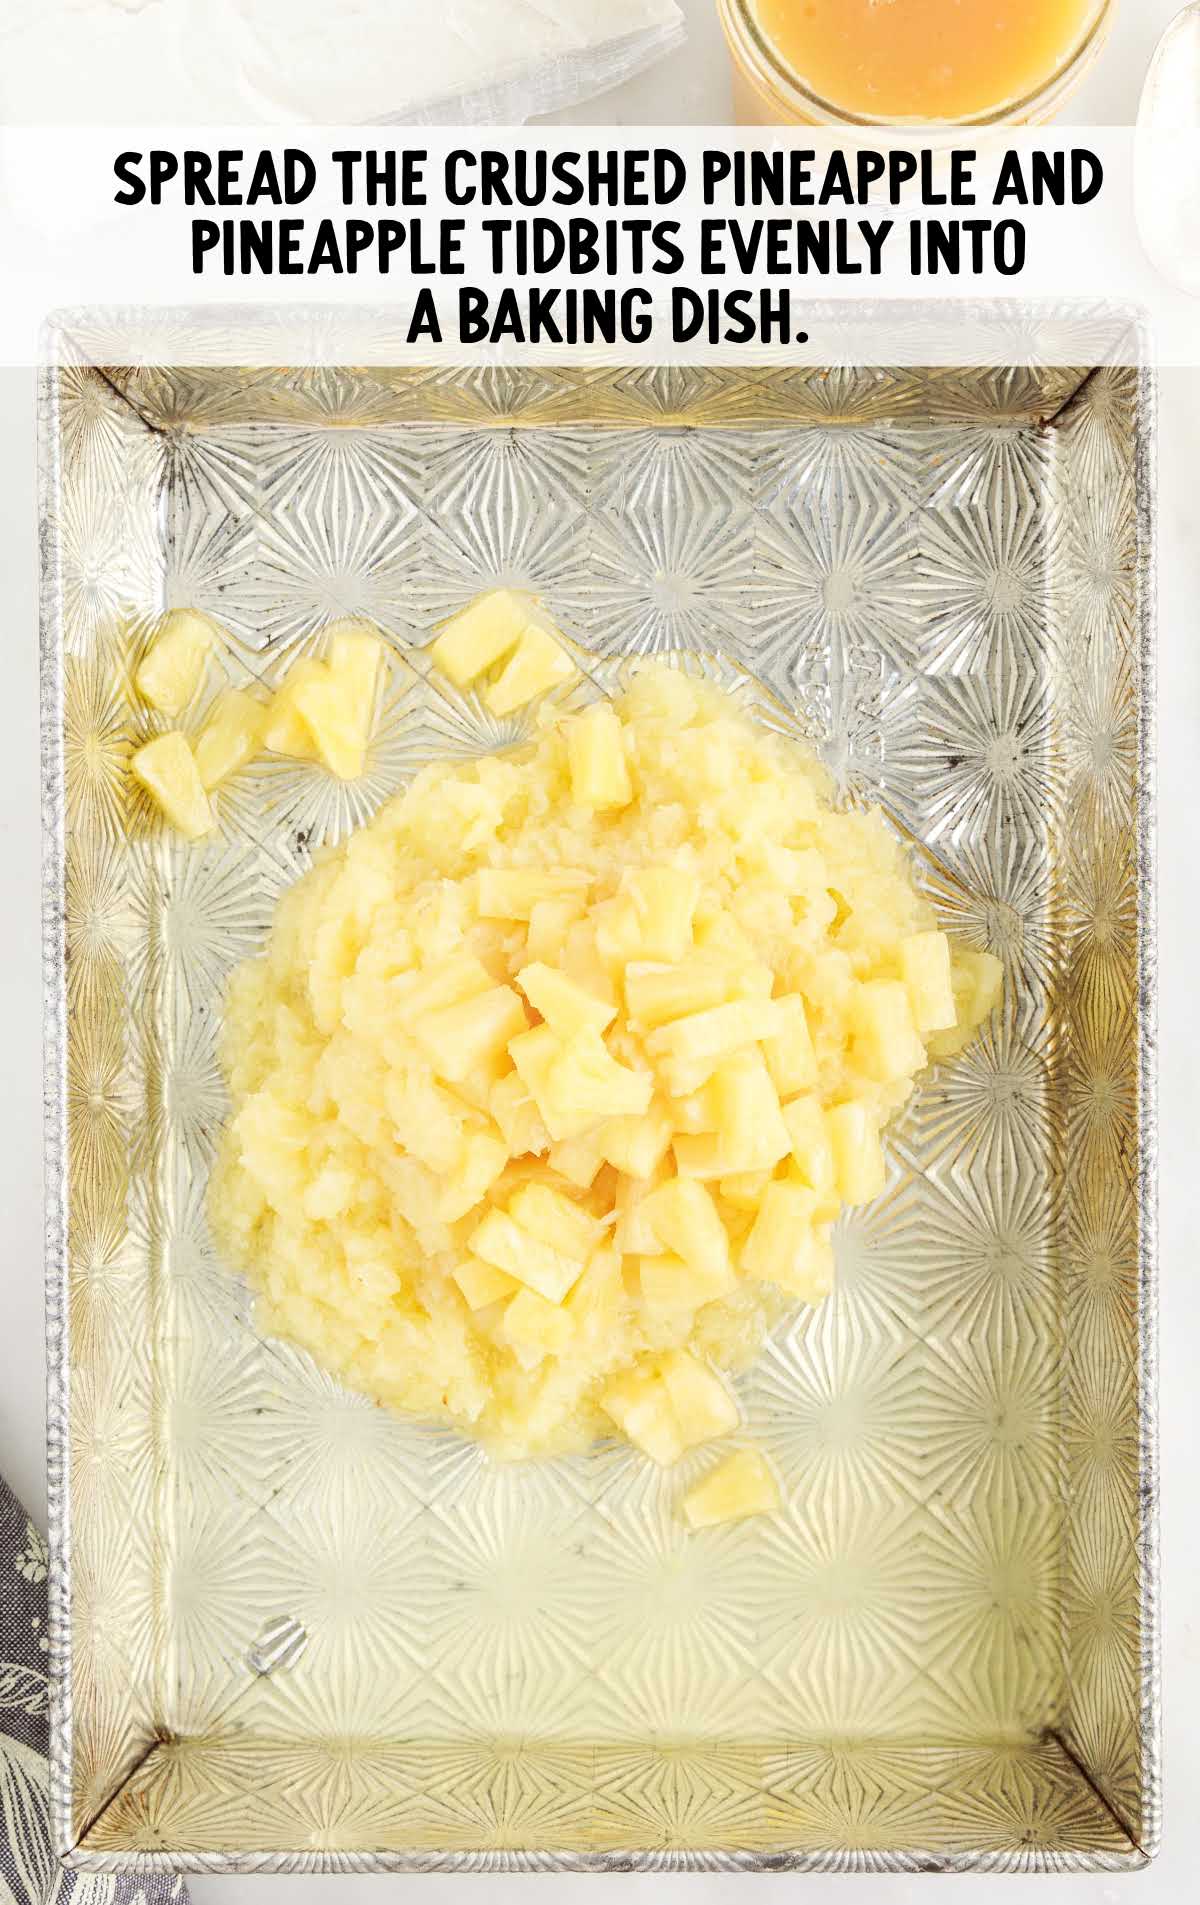 crushed pineapple and pineapple tidbits combined in a baking dish